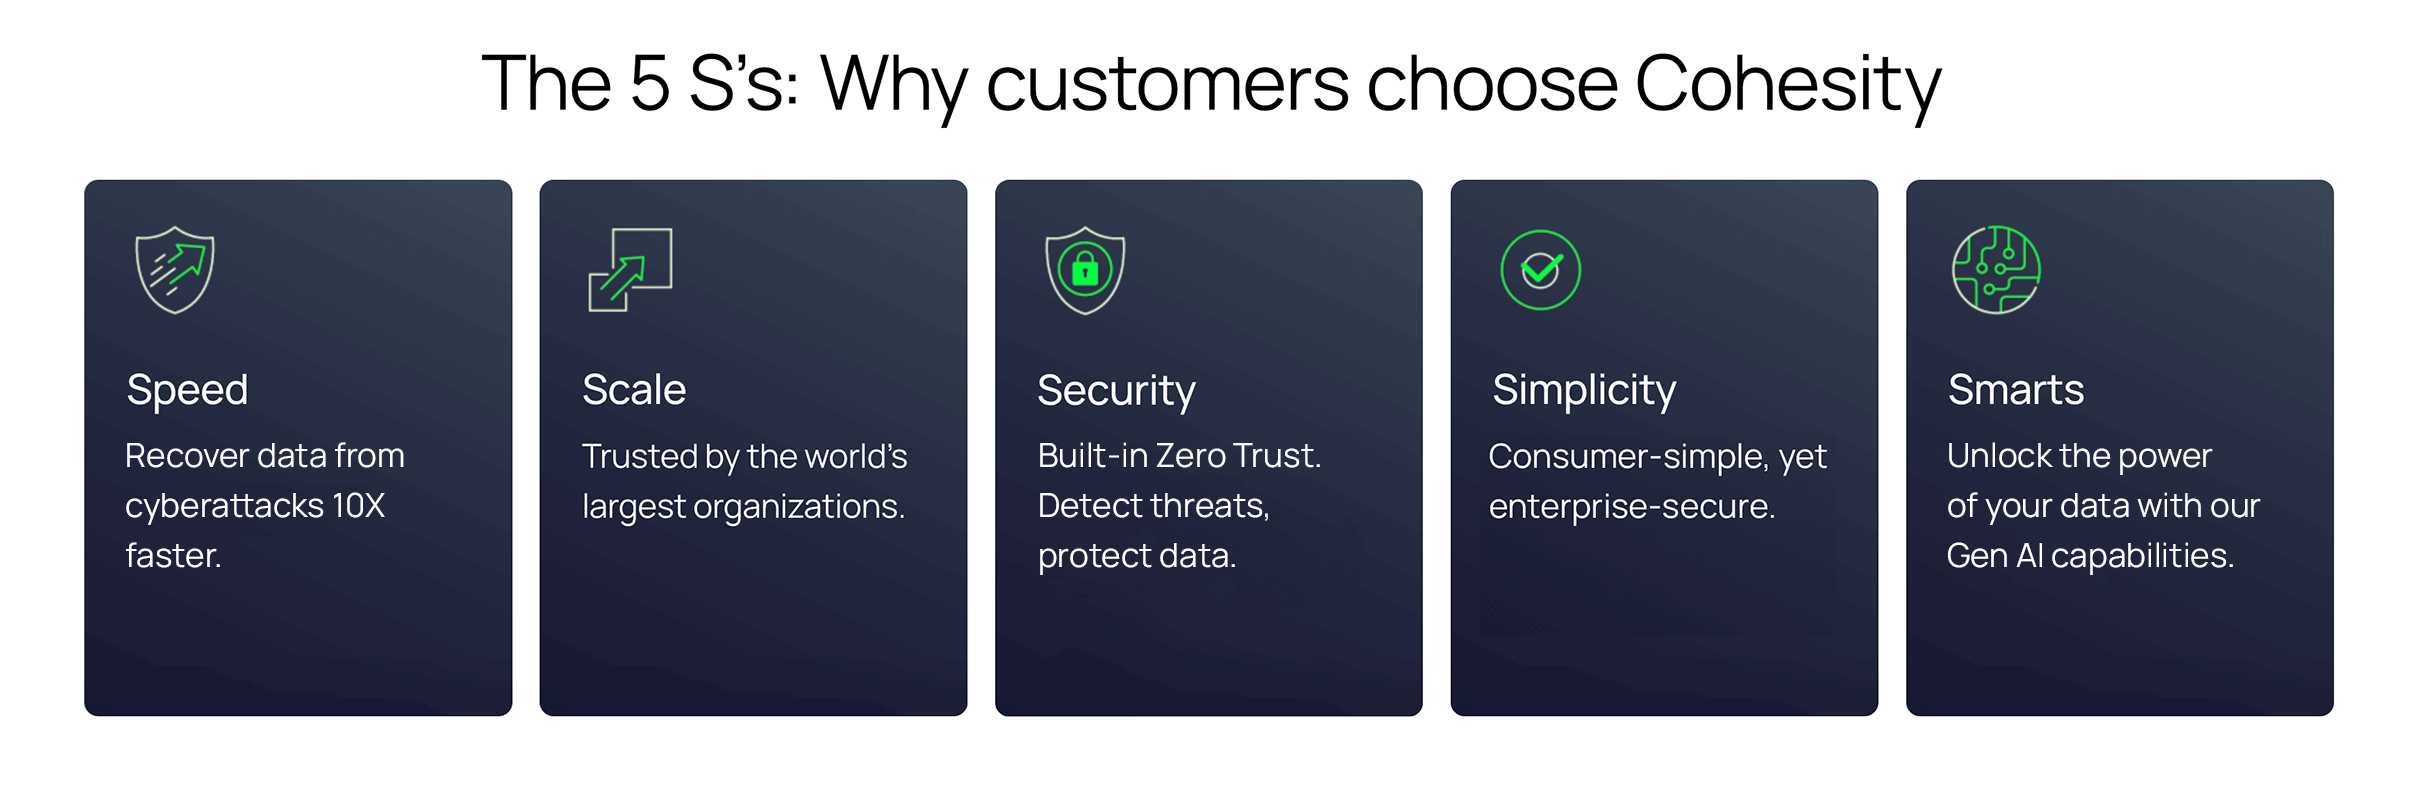 5 S's for why customers choose Cohesity - StateRAMP blog image